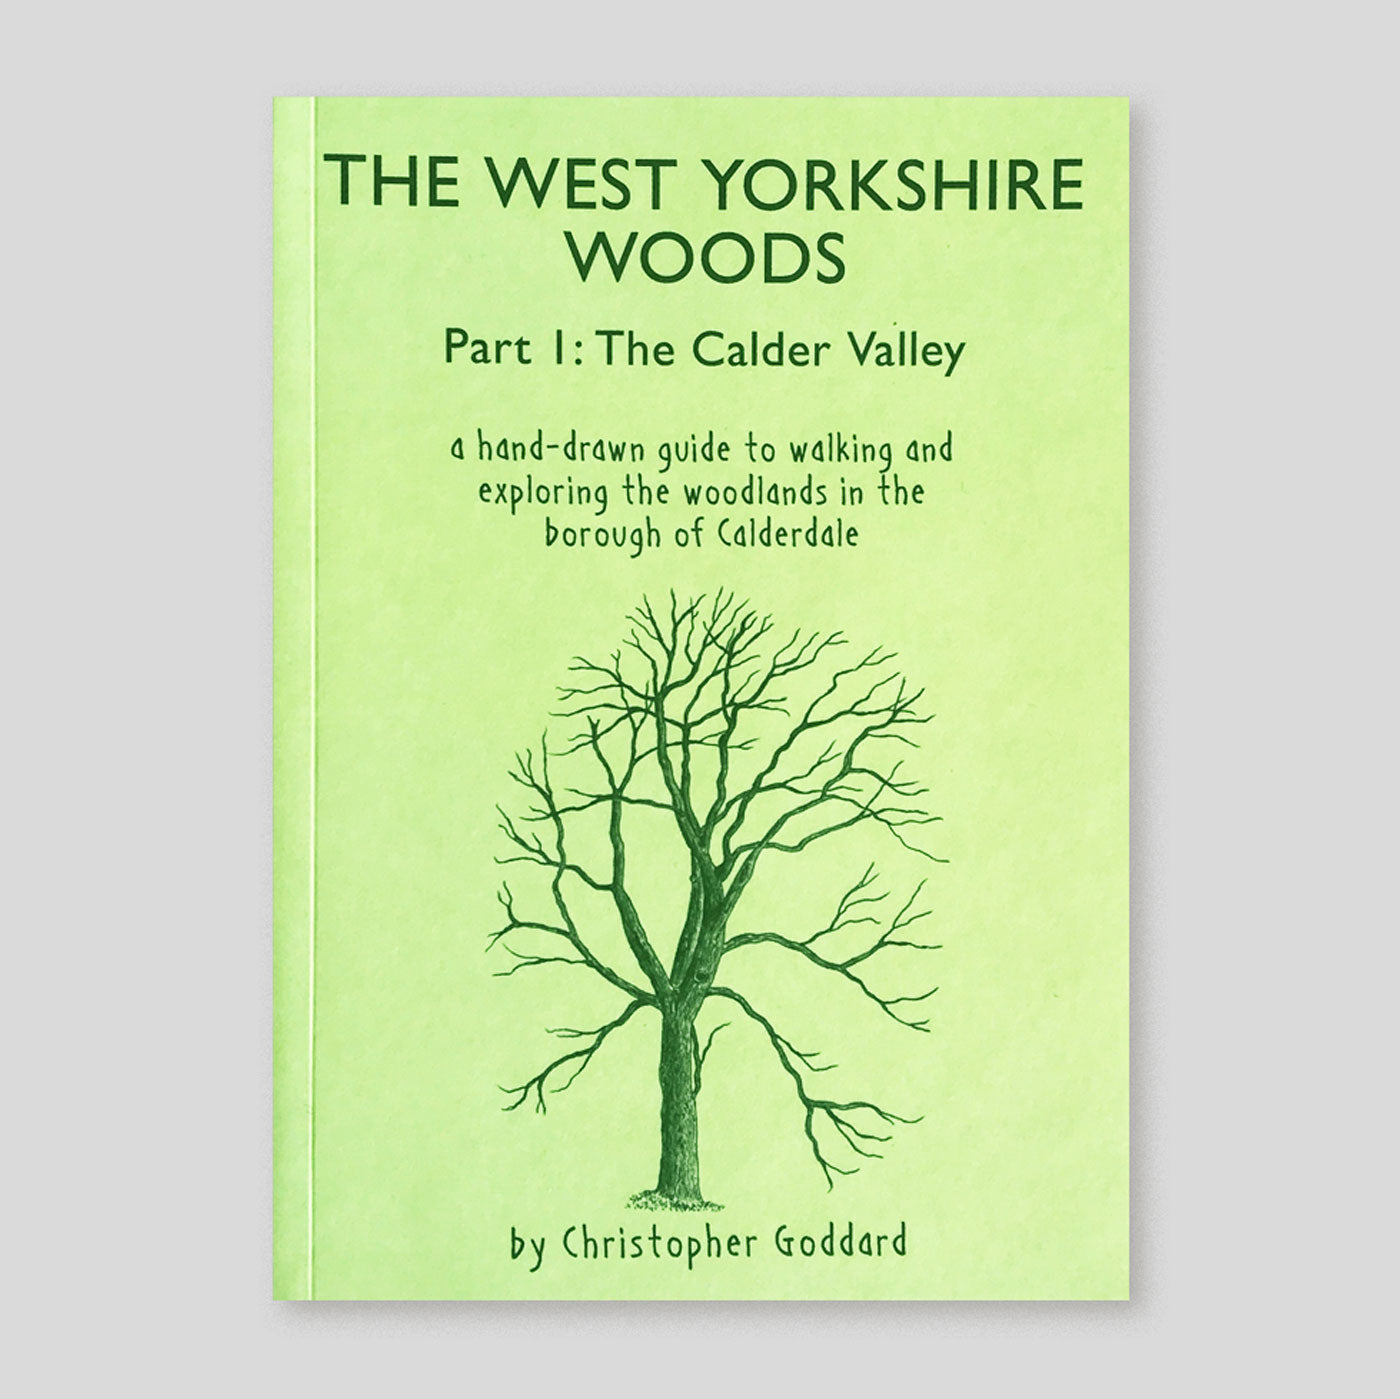 The West Yorkshire Woods: Part I The Calder Valley | Christopher Goddard | Colours May Vary 